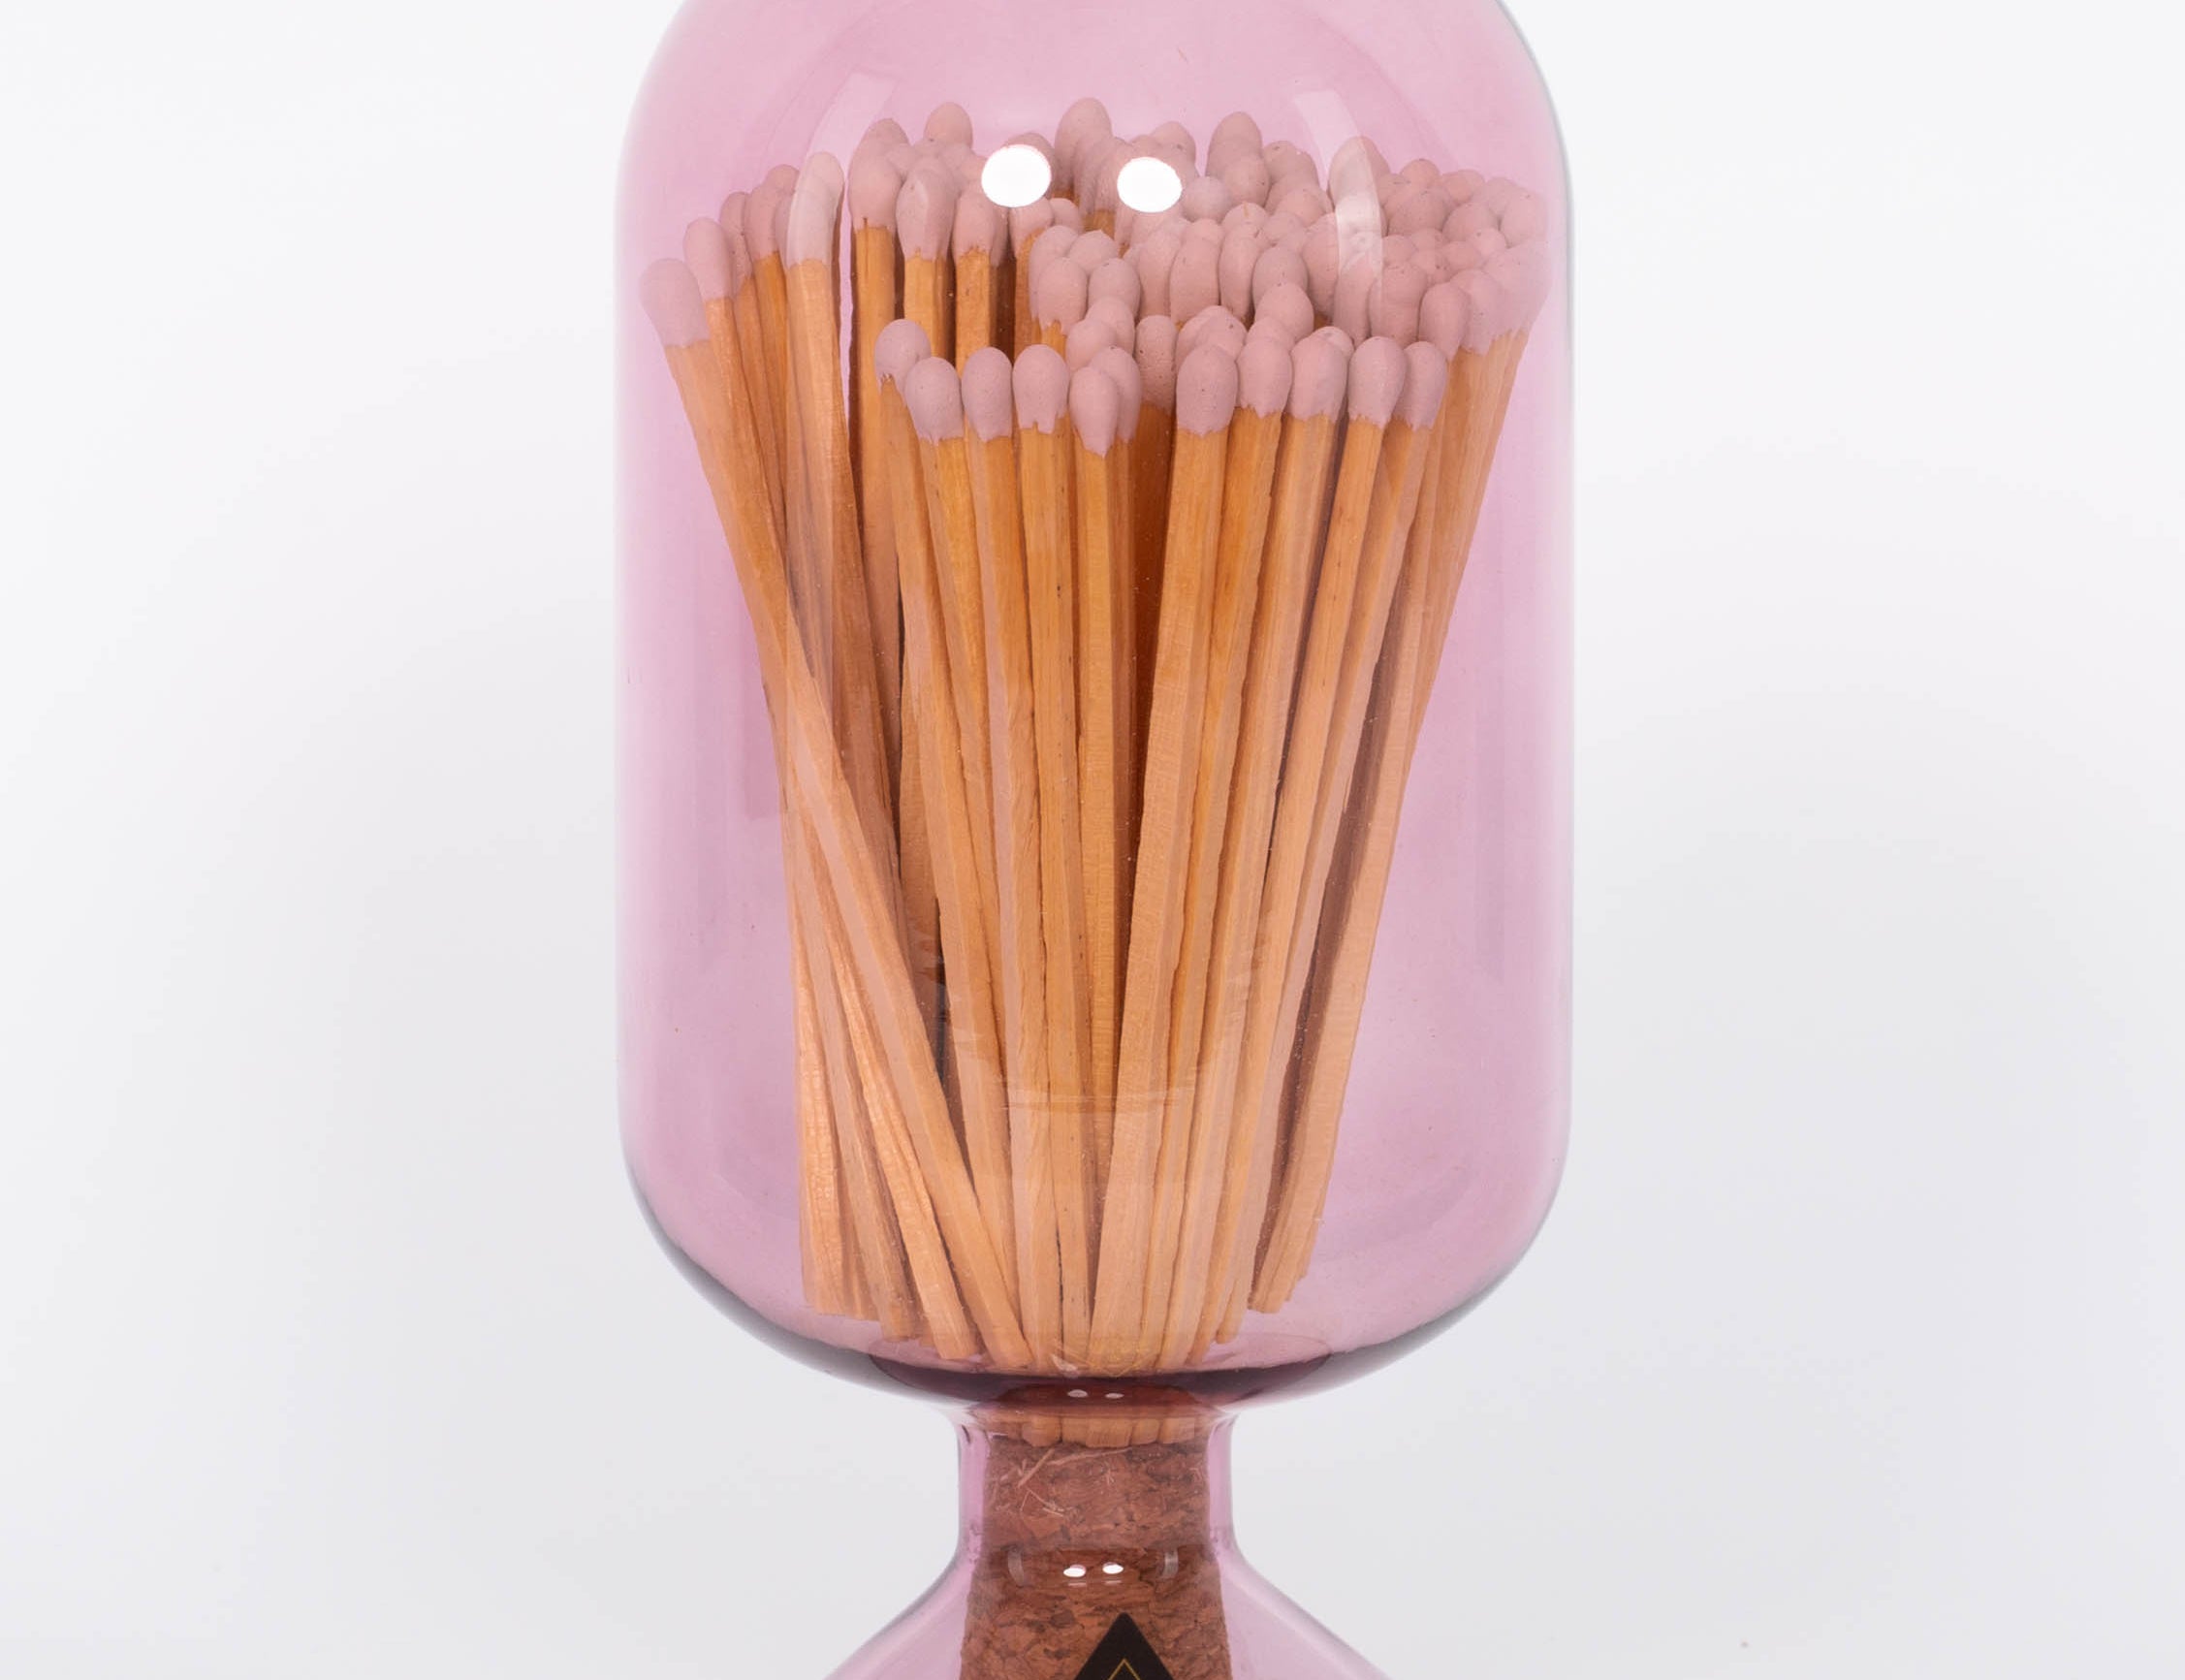 Mulberry colored Match Cloche by Skeem in jewel-toned vintage glass domes fitted with cork, holding 120 matches. White background.